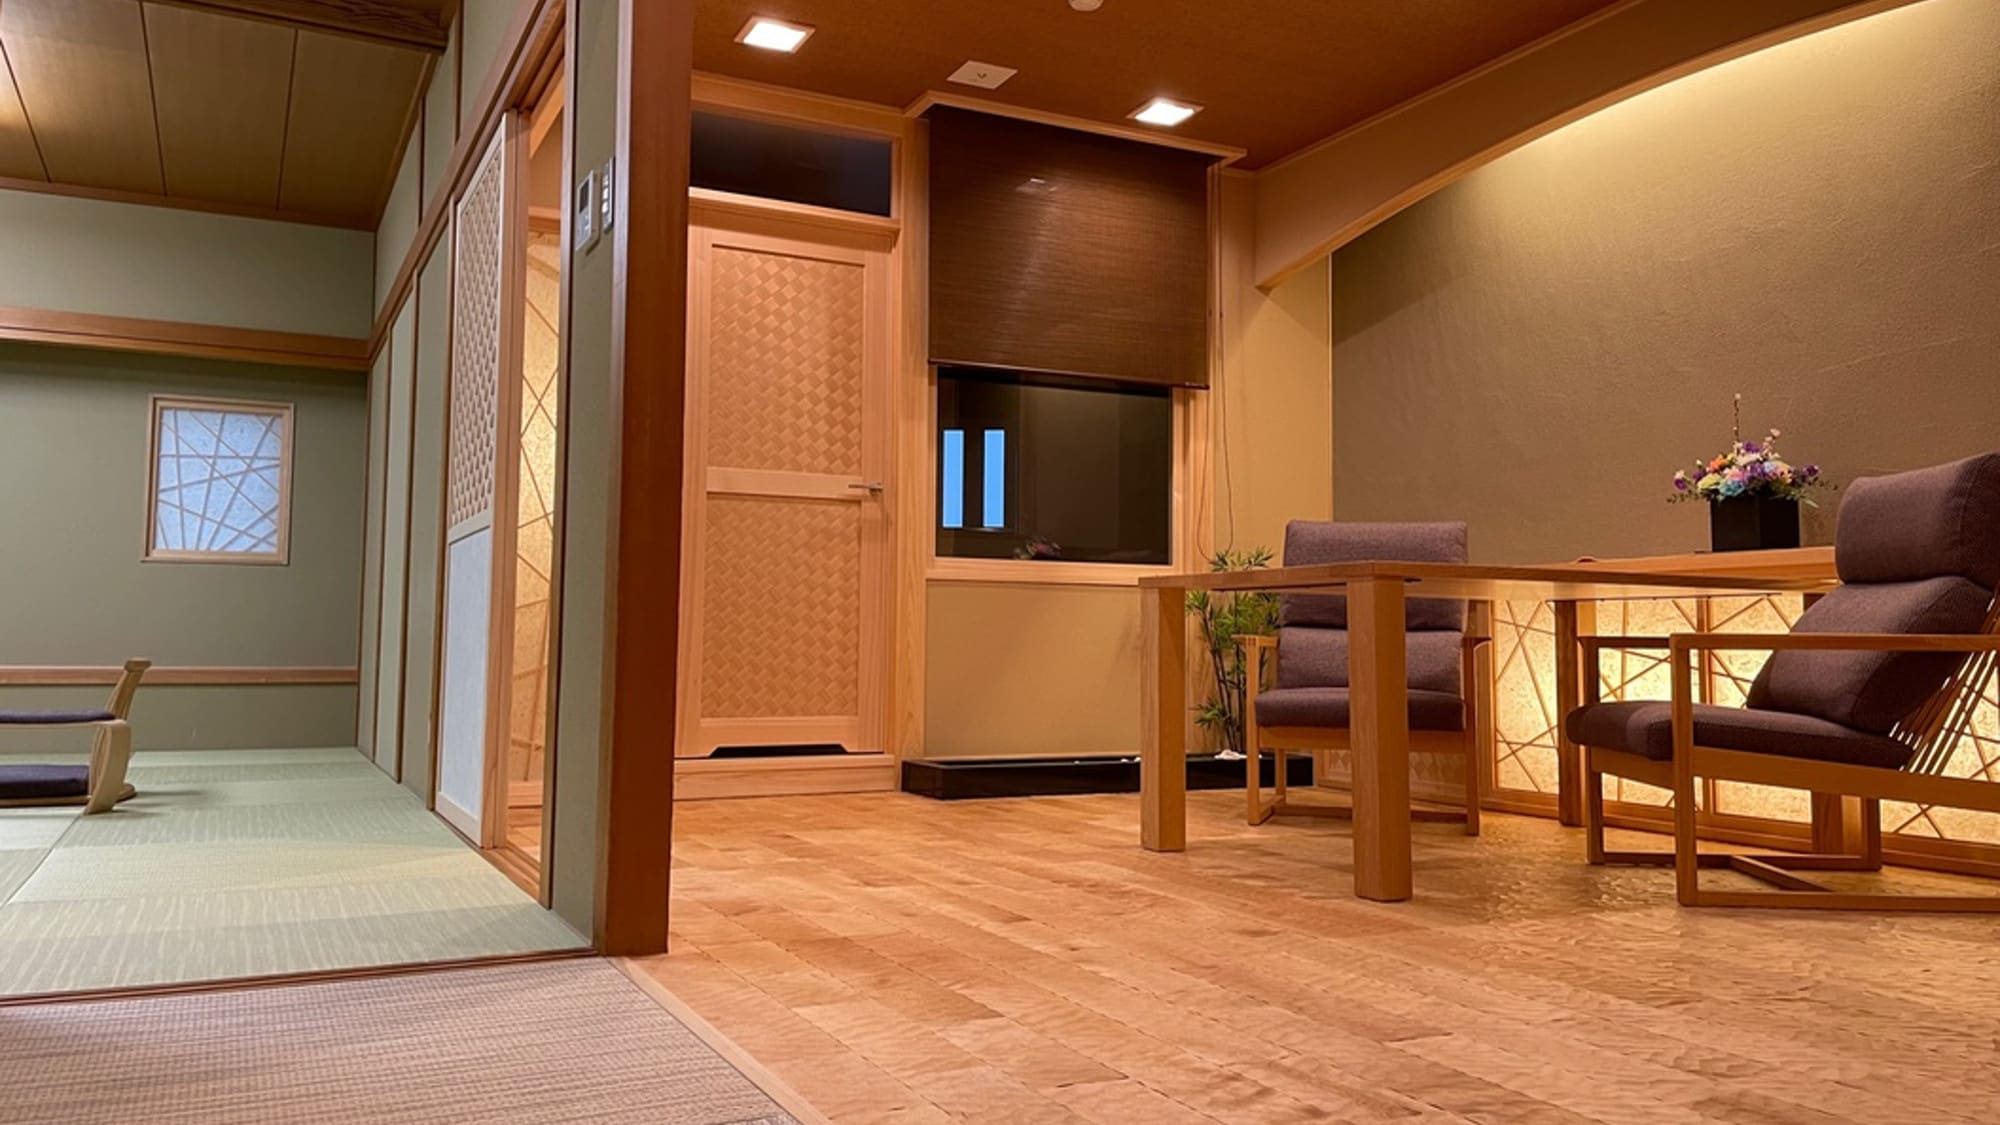 Opened in February 2022 Guest room where you can feel the warmth of craftsmanship [Ryusui]